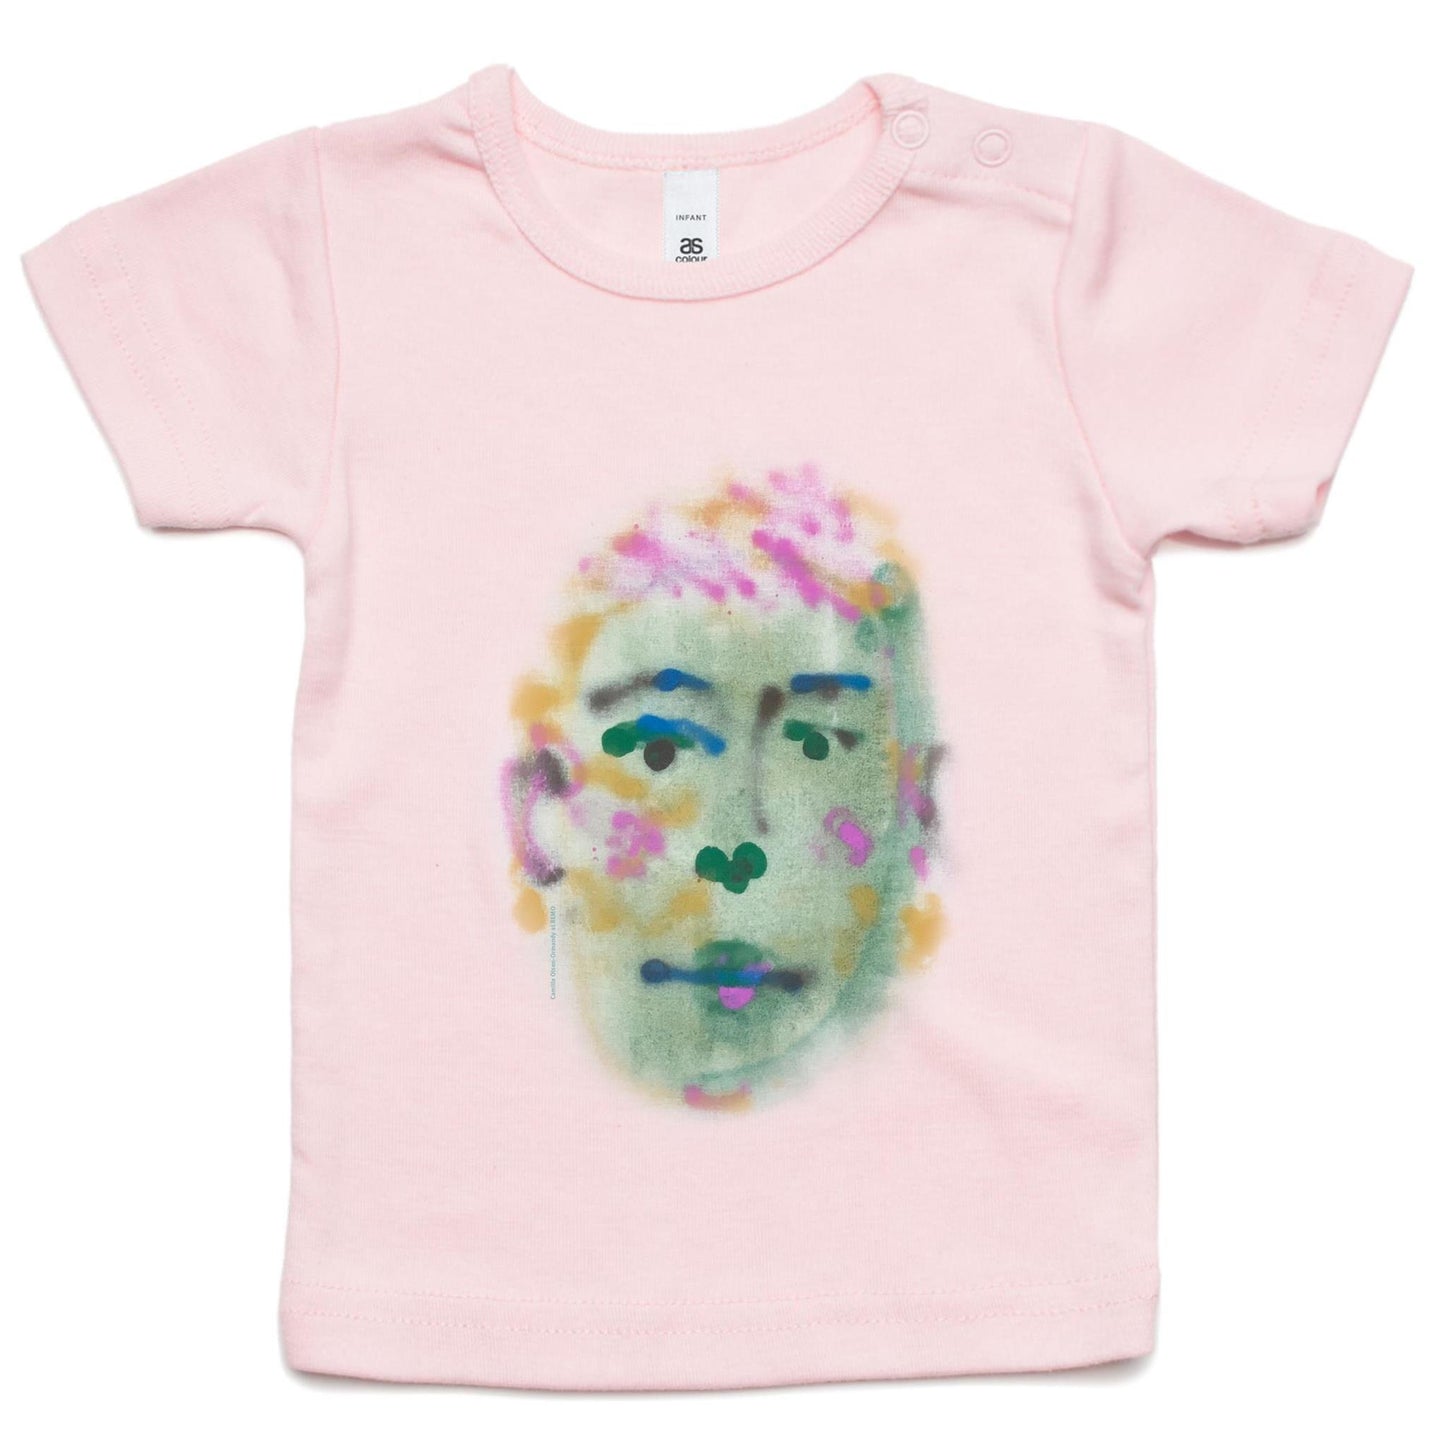 Green Face T Shirts for Babies